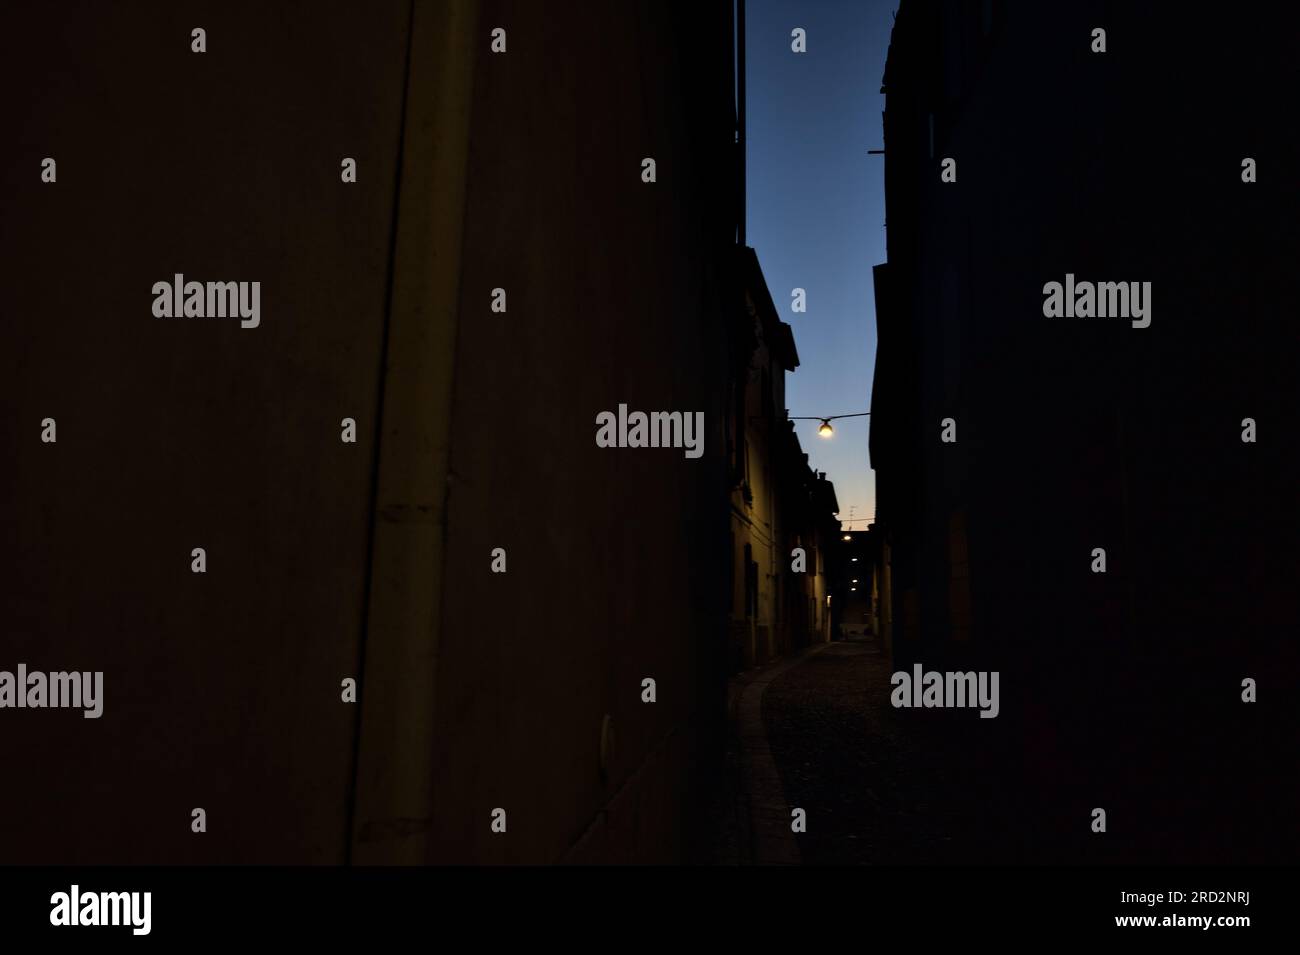 Narrow  street with a hanging lamp above it in an italiian town at dusk Stock Photo